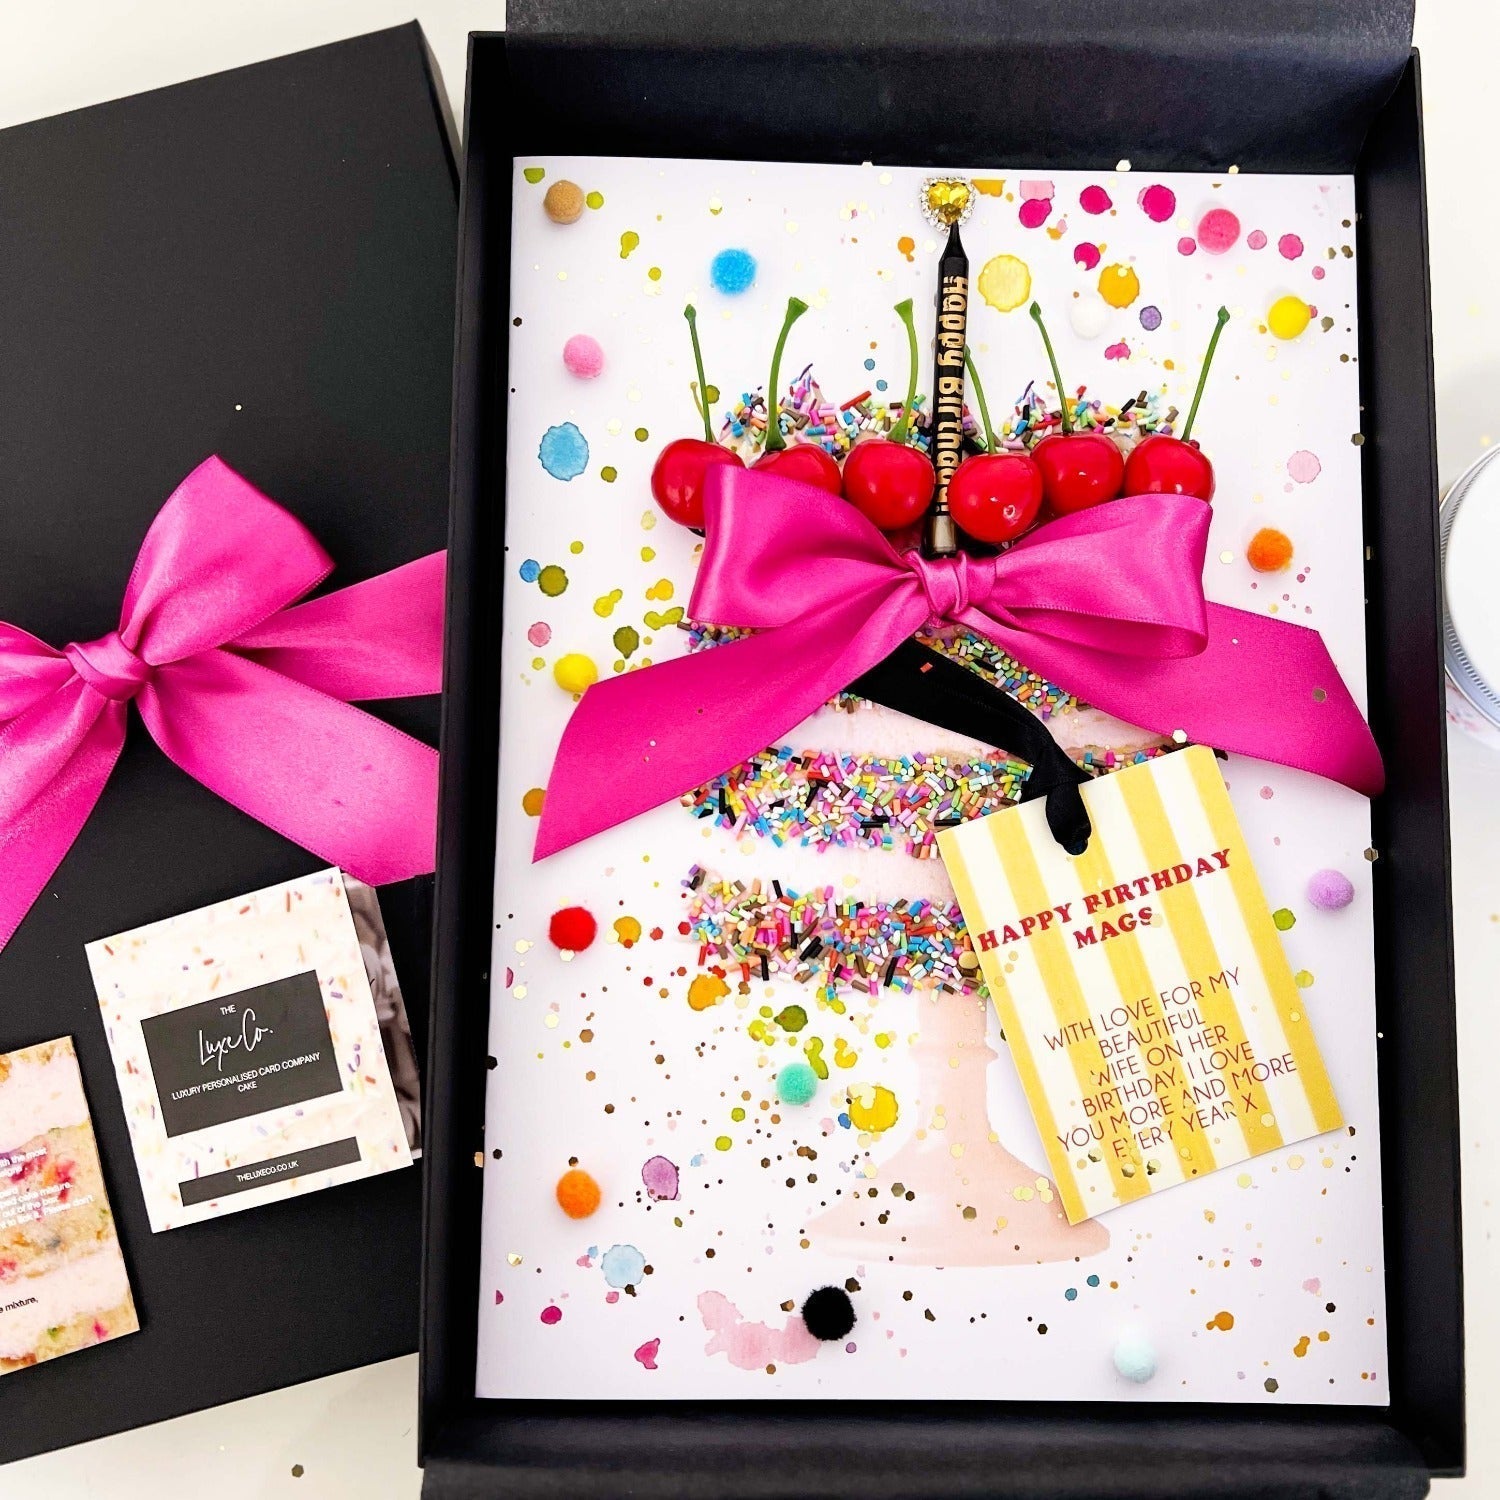 Luxury birthday card for best friends 21st birthday | Scented in birthday cake to look and smell like the real thing cards by The Luxe Co